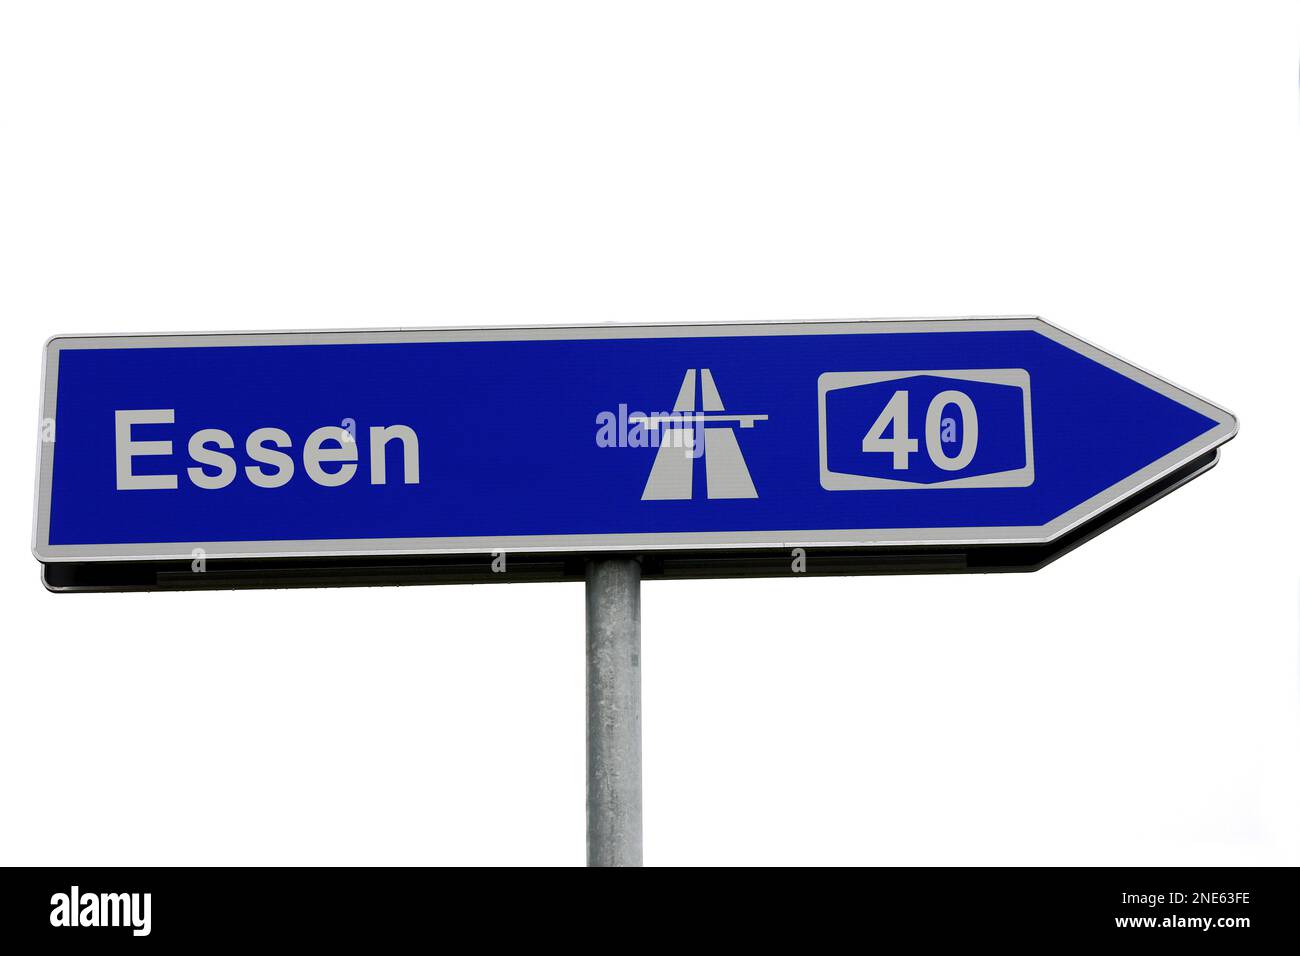 Signpost to the A40 motorway towards Essen, Germany Stock Photo